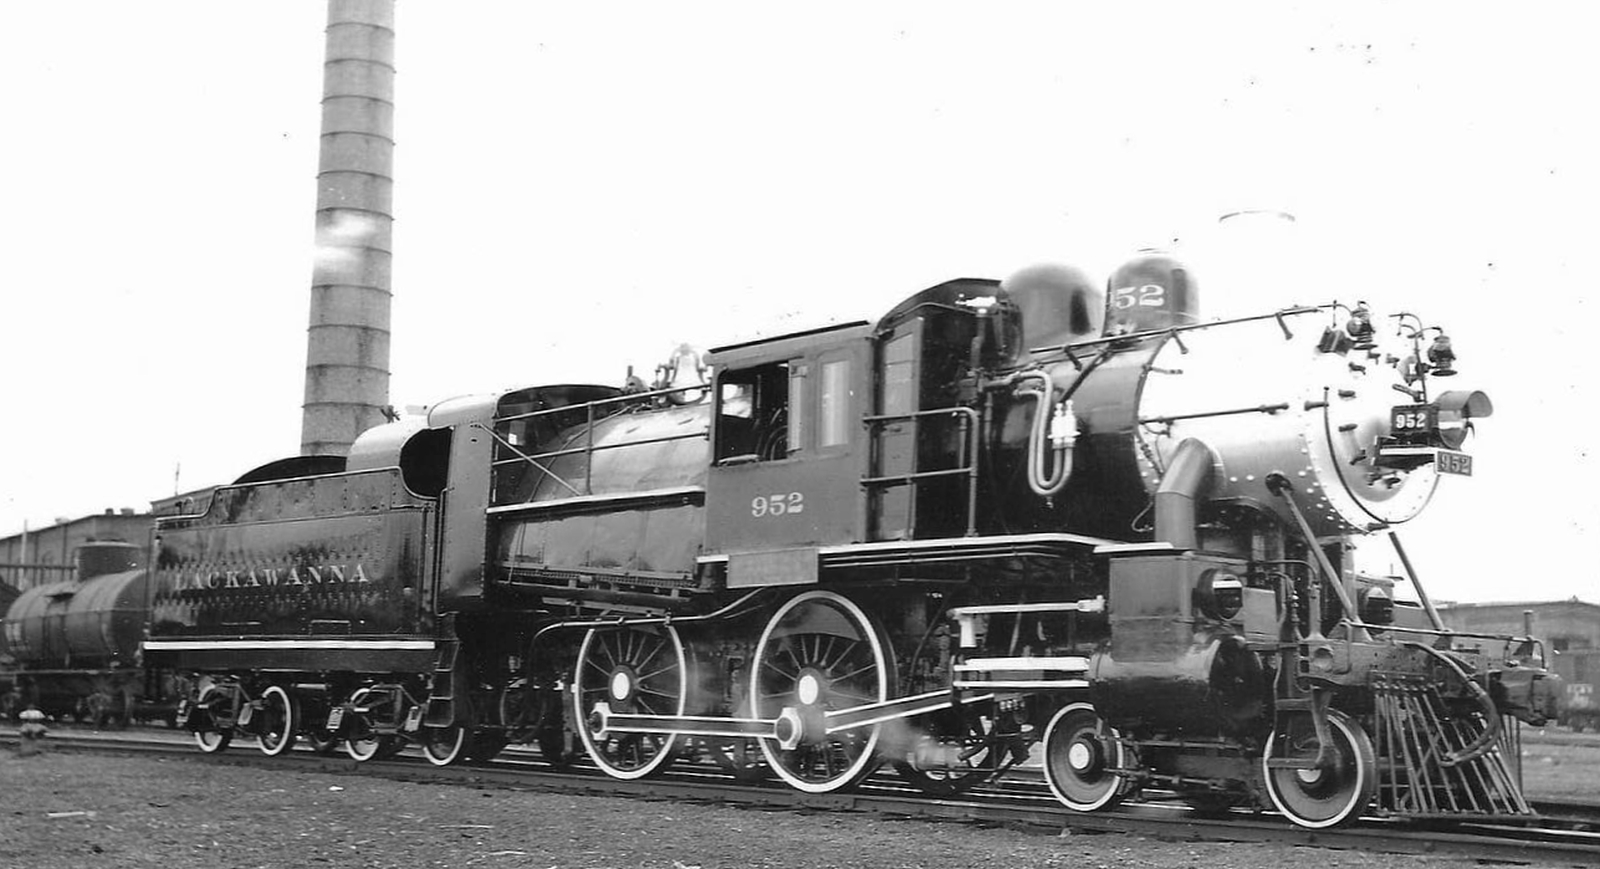 G-6a No. 952 in April 1939 in Kingsland, New Jersey